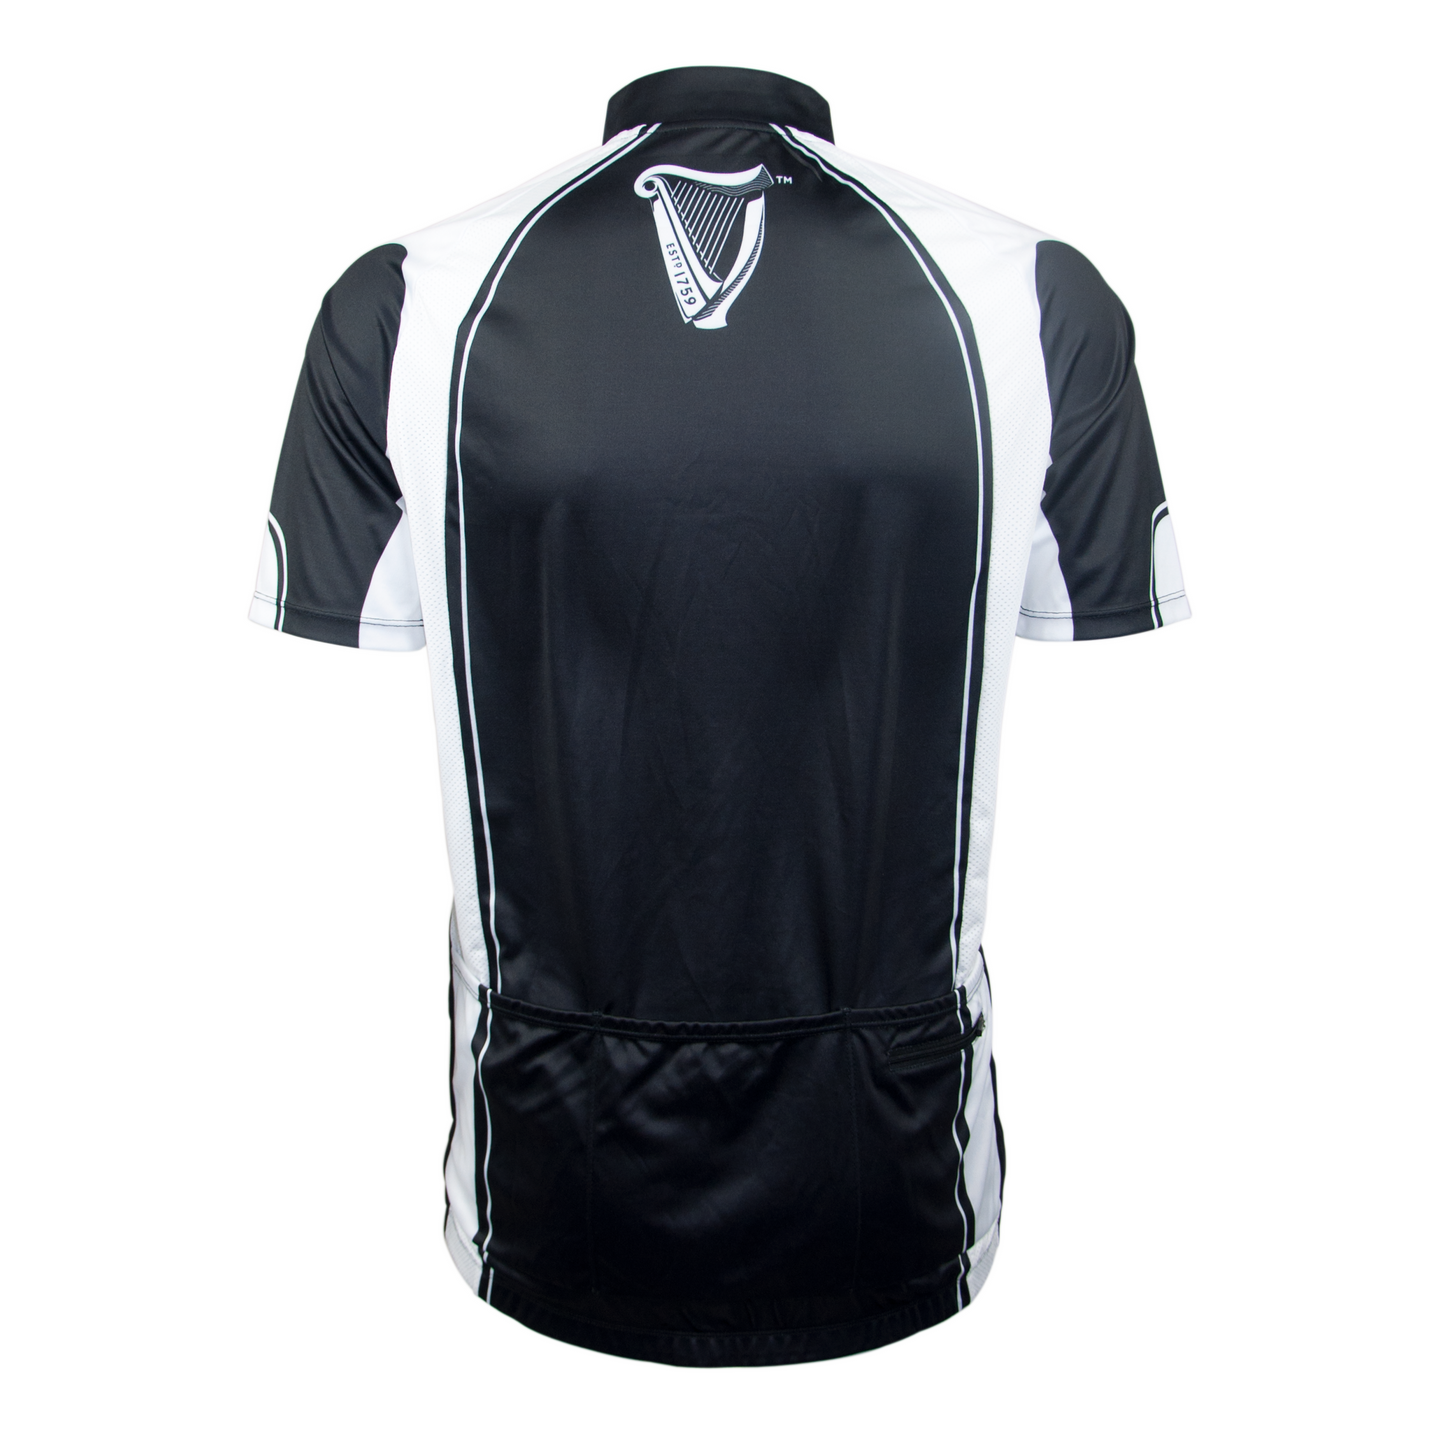 The back view of a men's black and white Guinness UK Performance Cycling Jersey made of polyester.